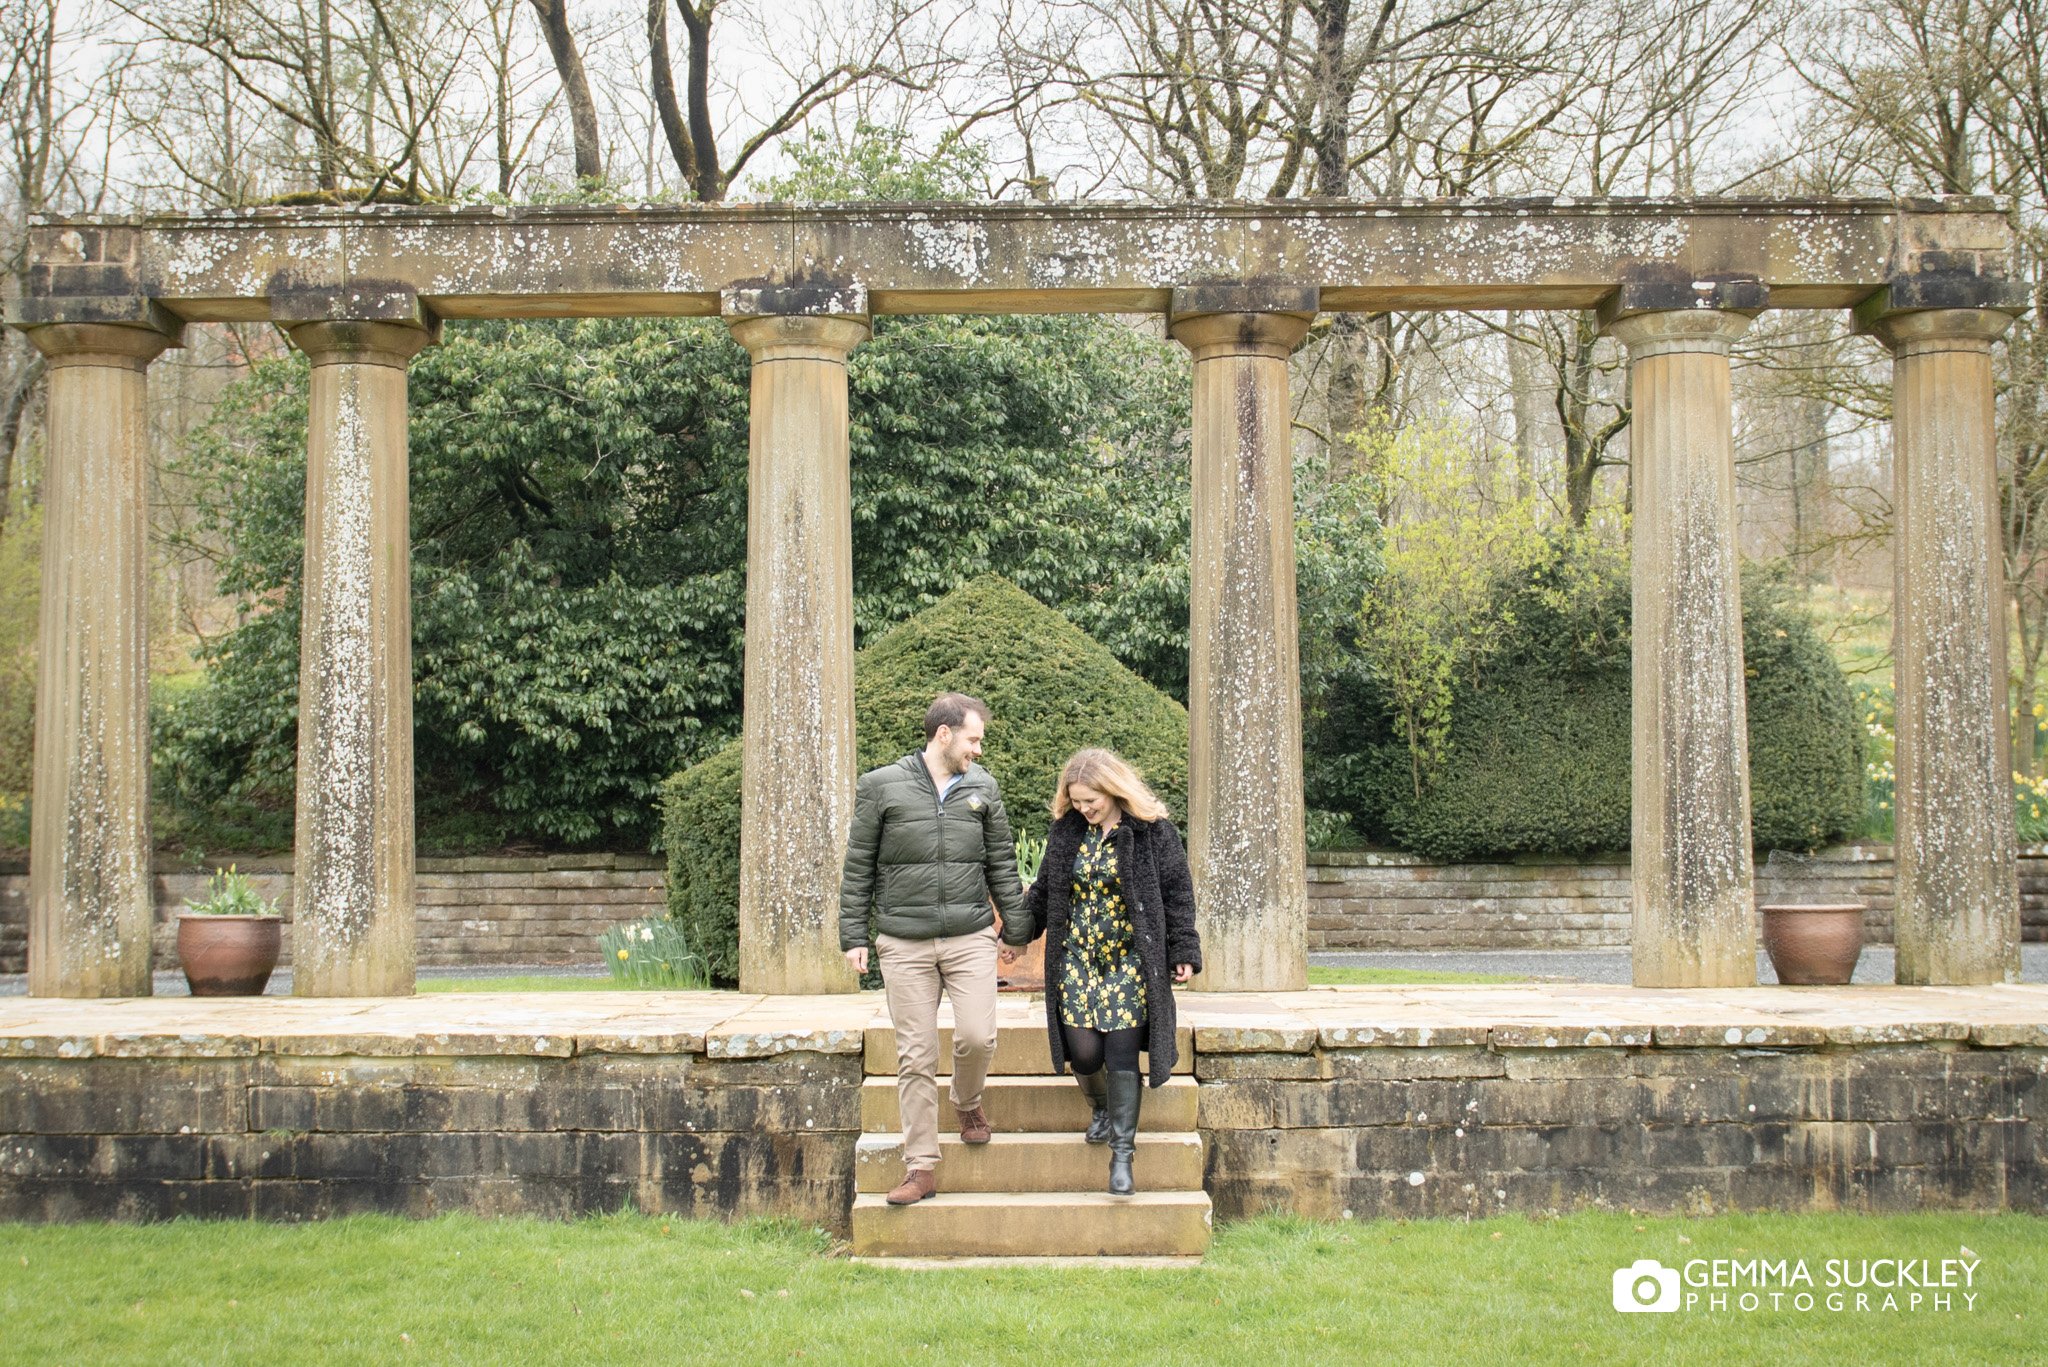 engaged couple walking by the ruin at coniston hotel estate